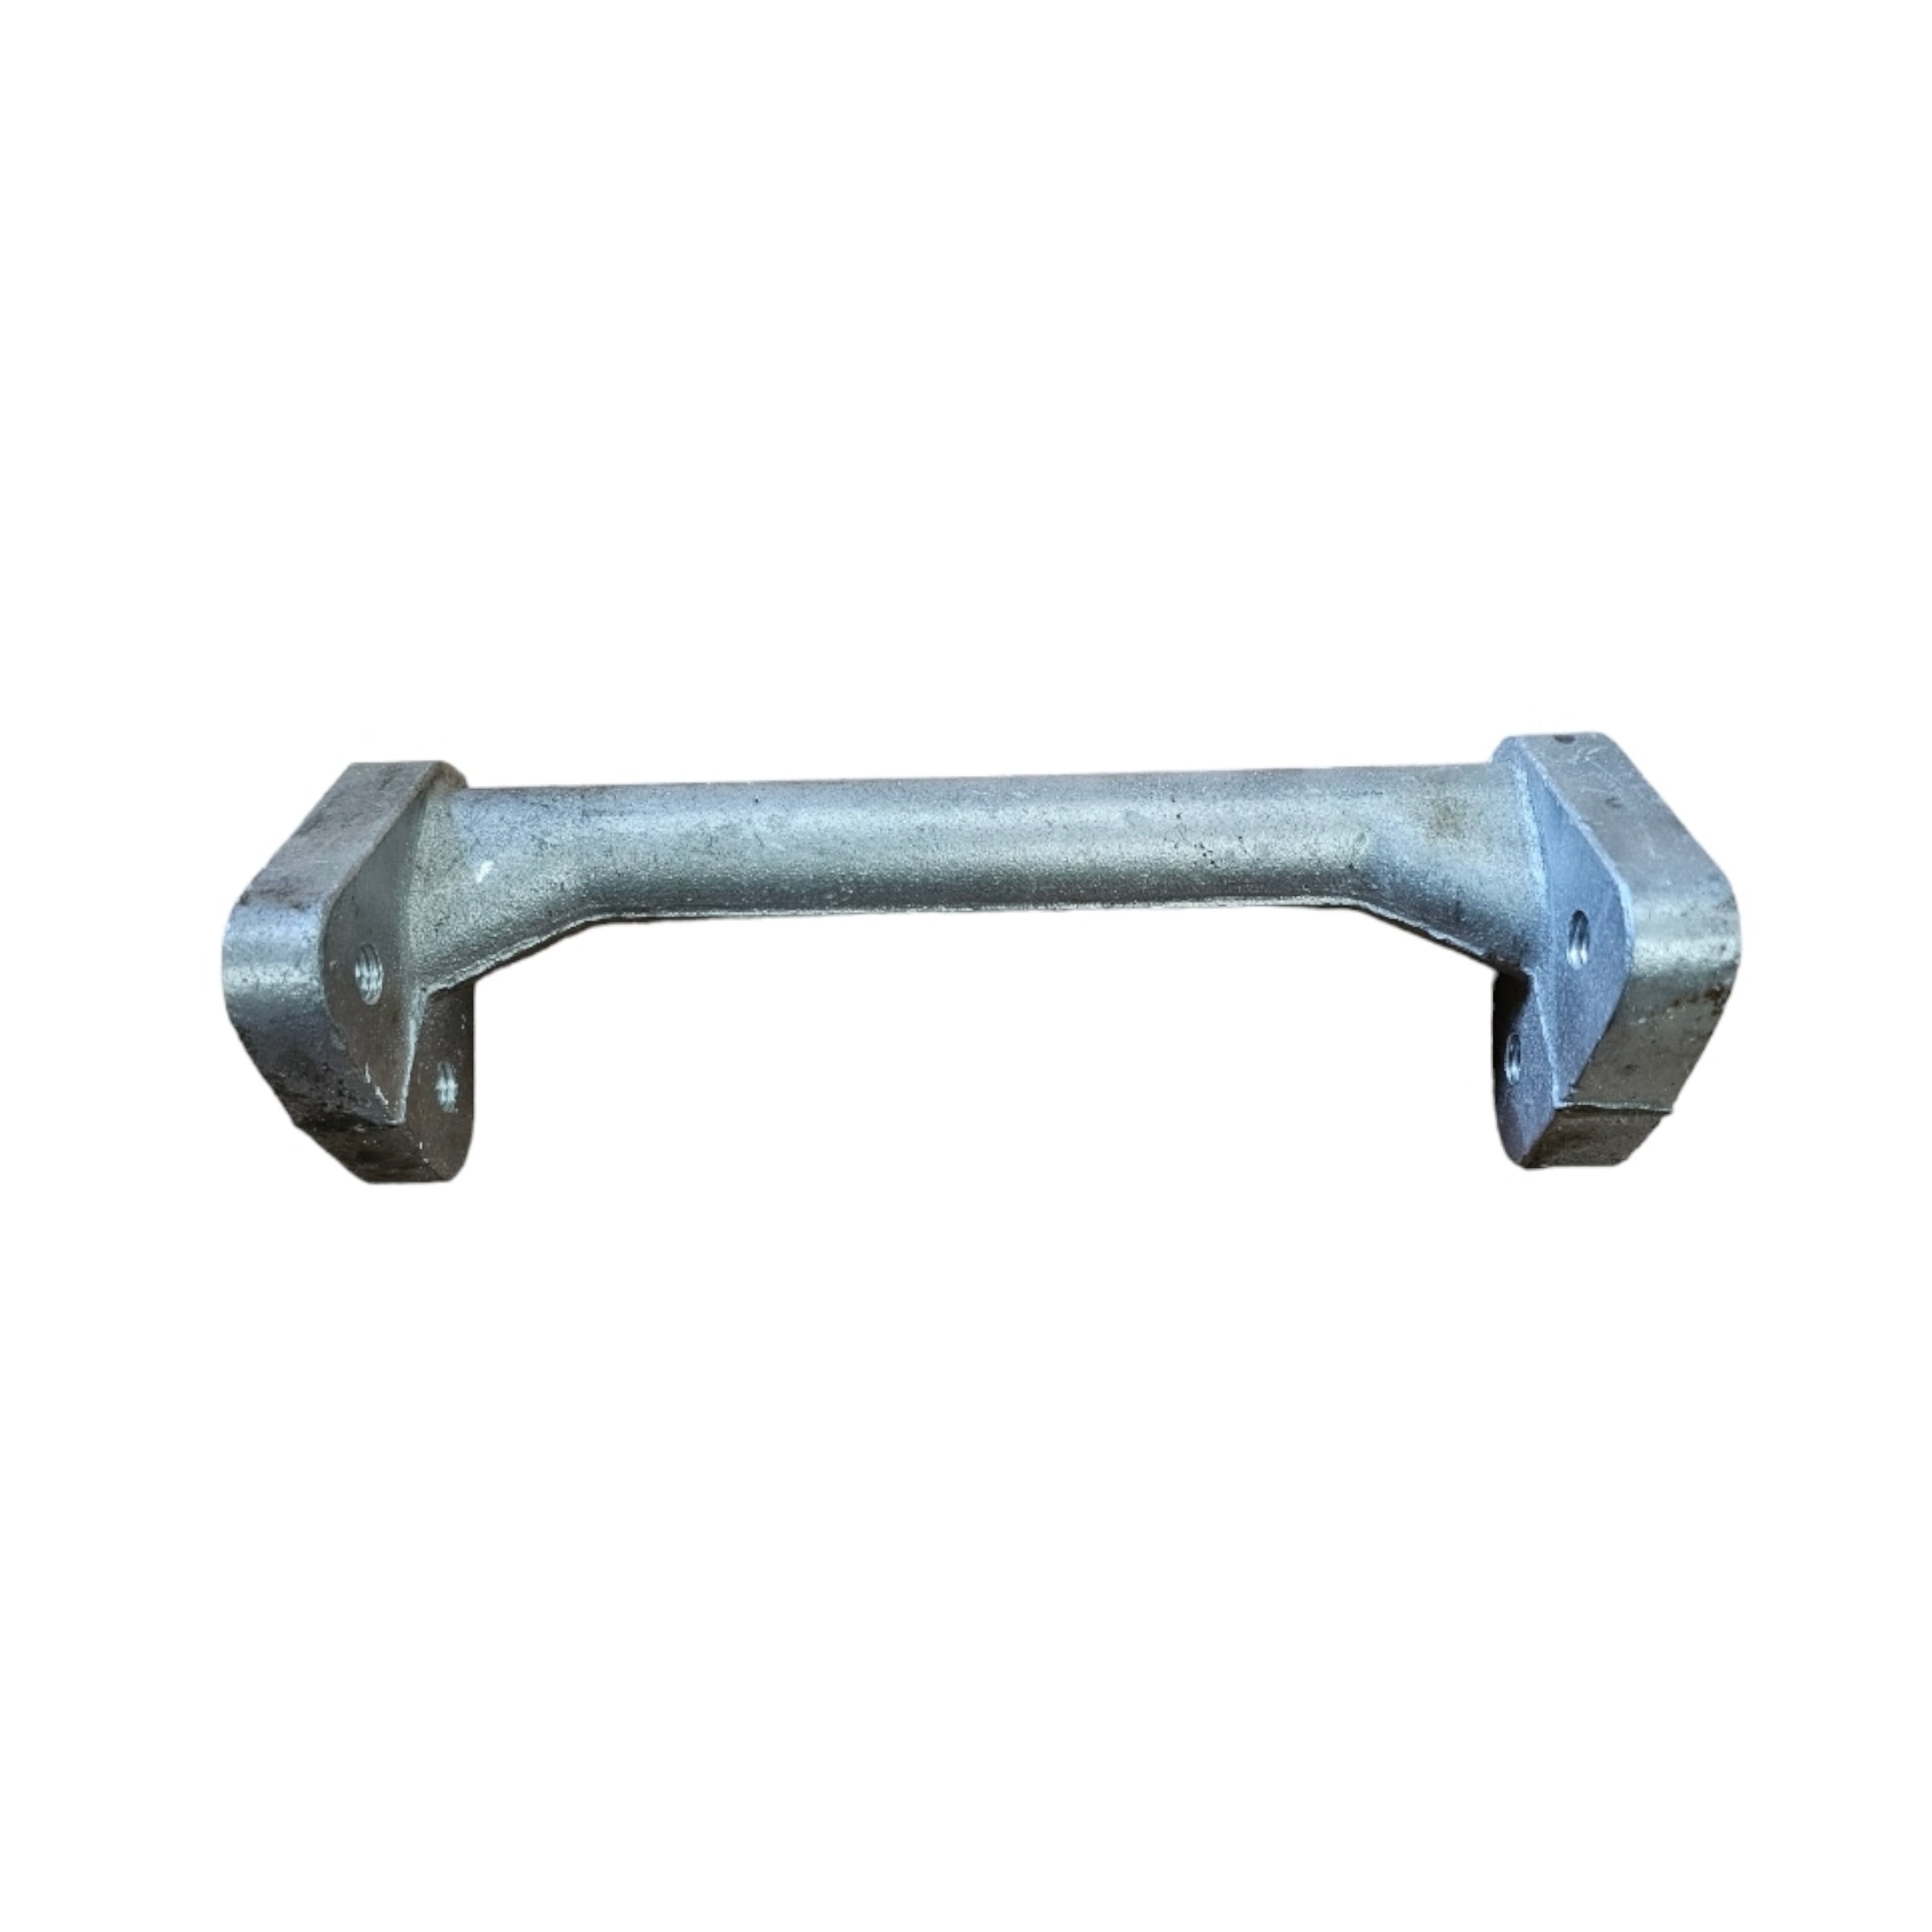 Paddock turf cutter spare part